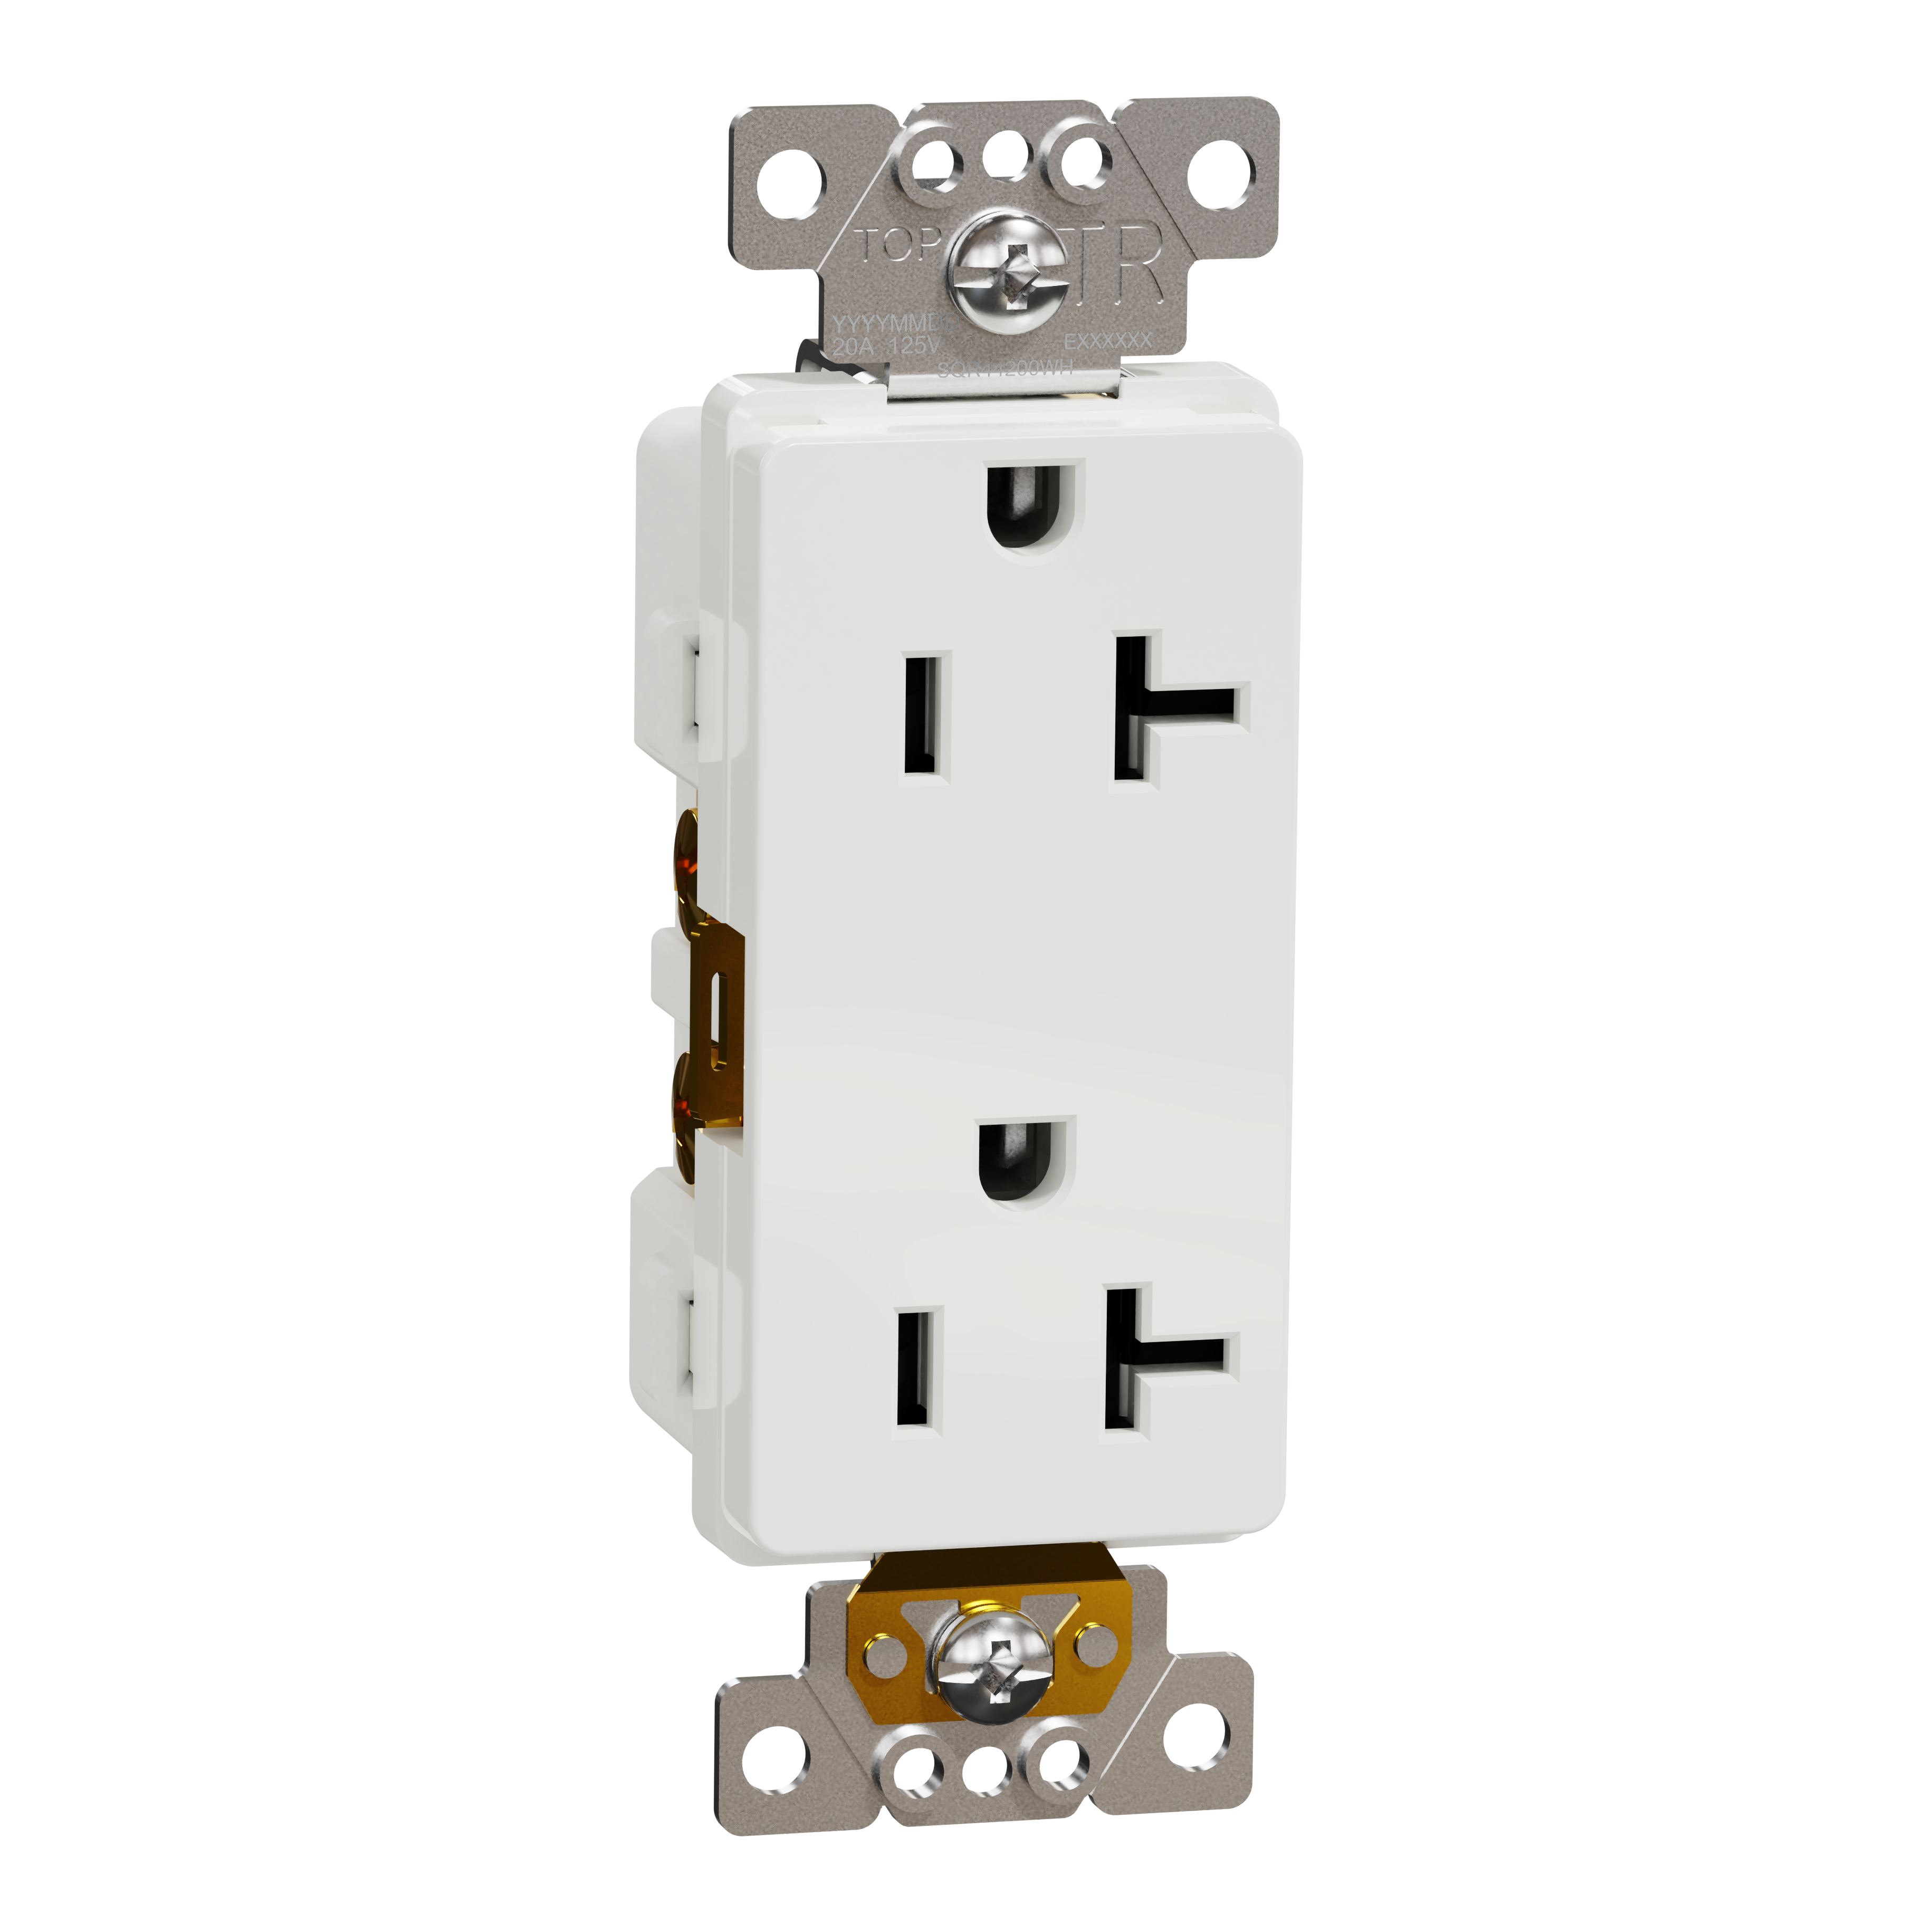 Socket-outlet, X Series, 20A, decorator, tamper resistant, commercial, white, matte finish